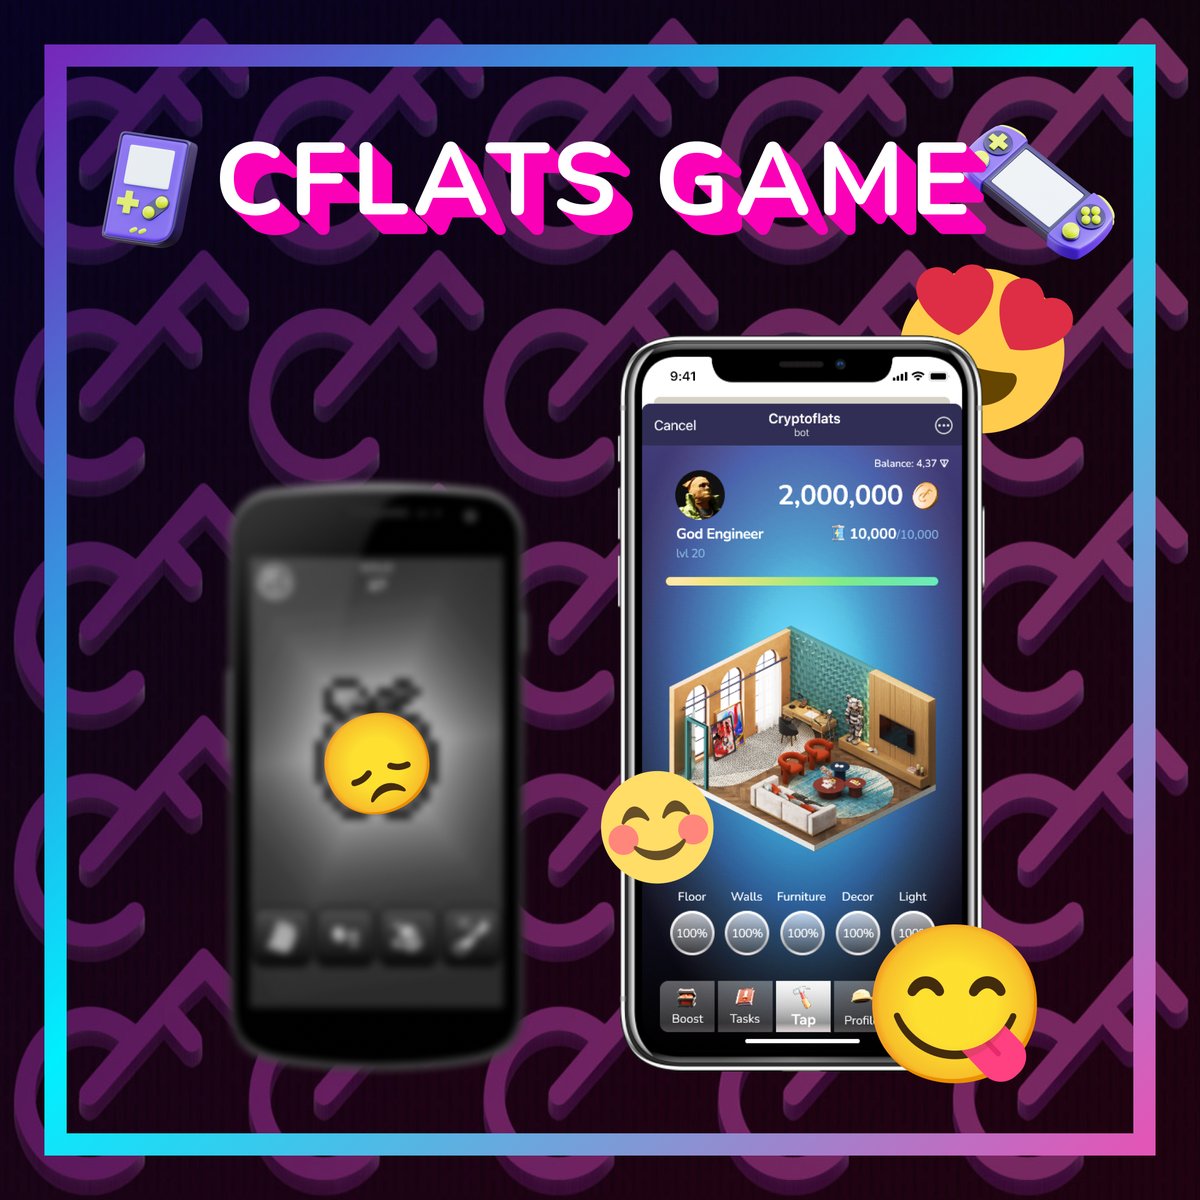 😴 Why settle for boring P2E games when you can join the exciting world of real estate investing with Cryptoflats?

 Our platform offers a unique and engaging gaming experience. 

#Cryptoflats #P2E #RealEstateInvesting